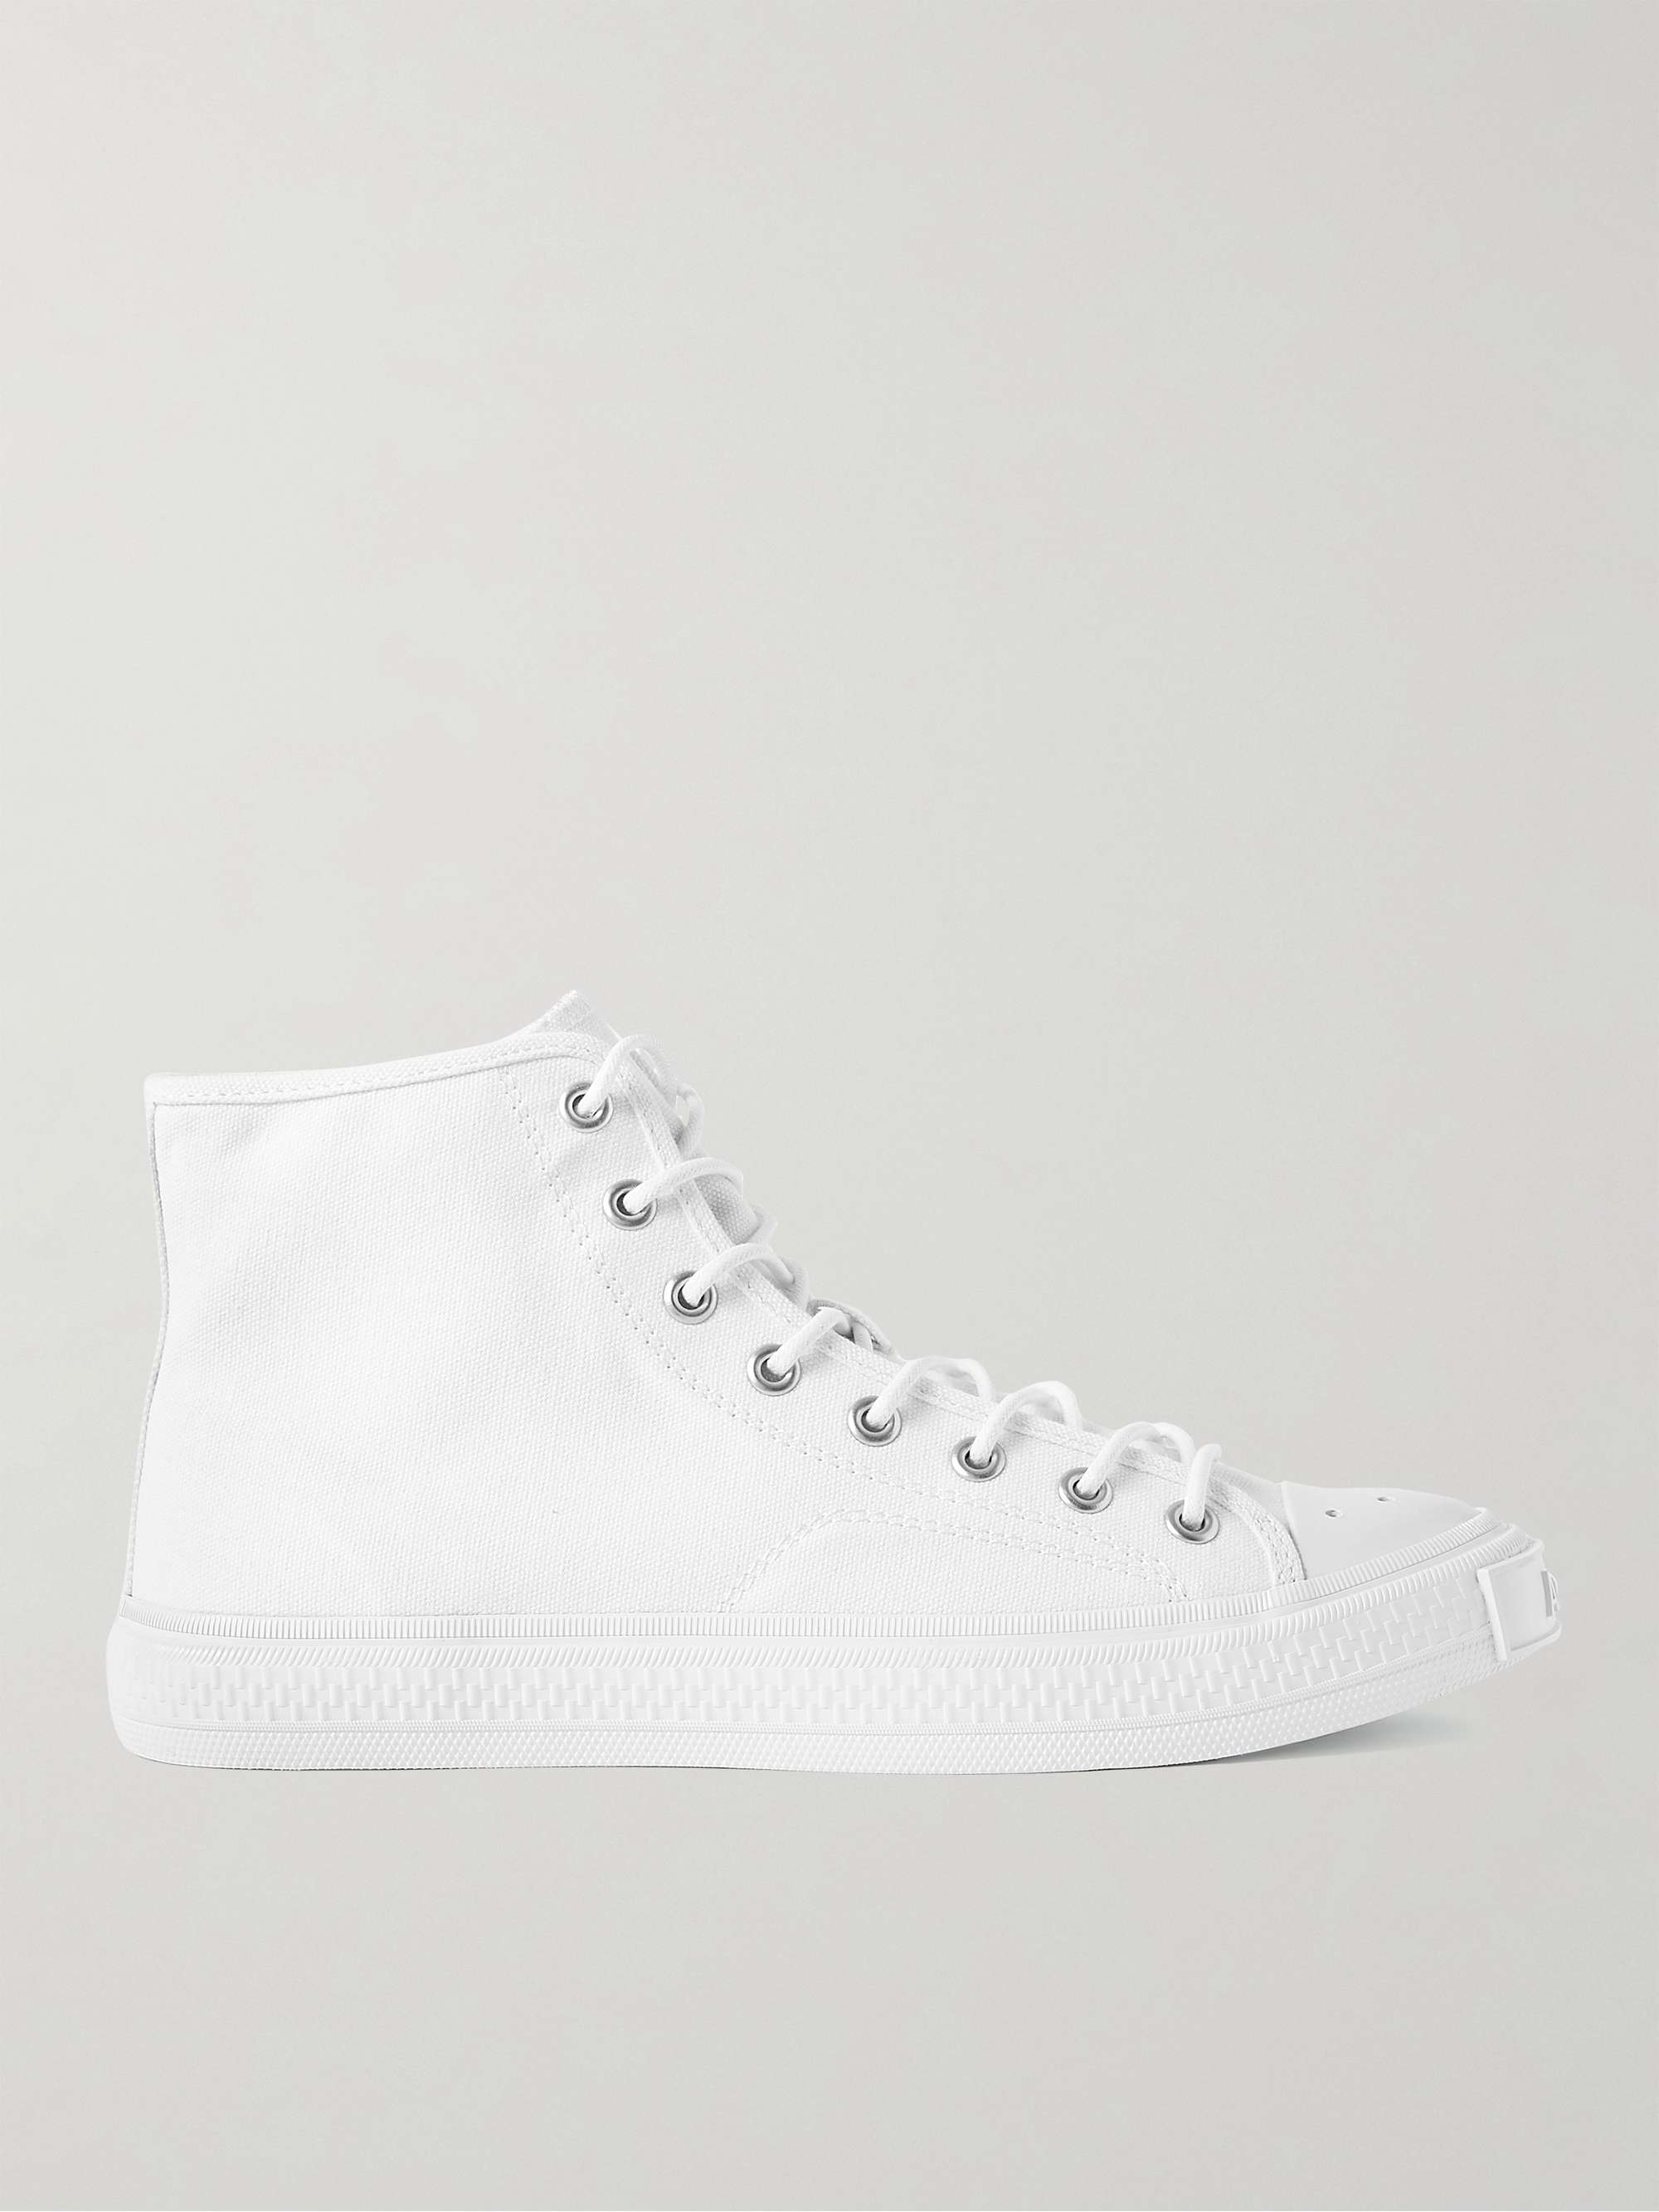 ACNE STUDIOS Rubber-Trimmed Canvas High-Top Sneakers